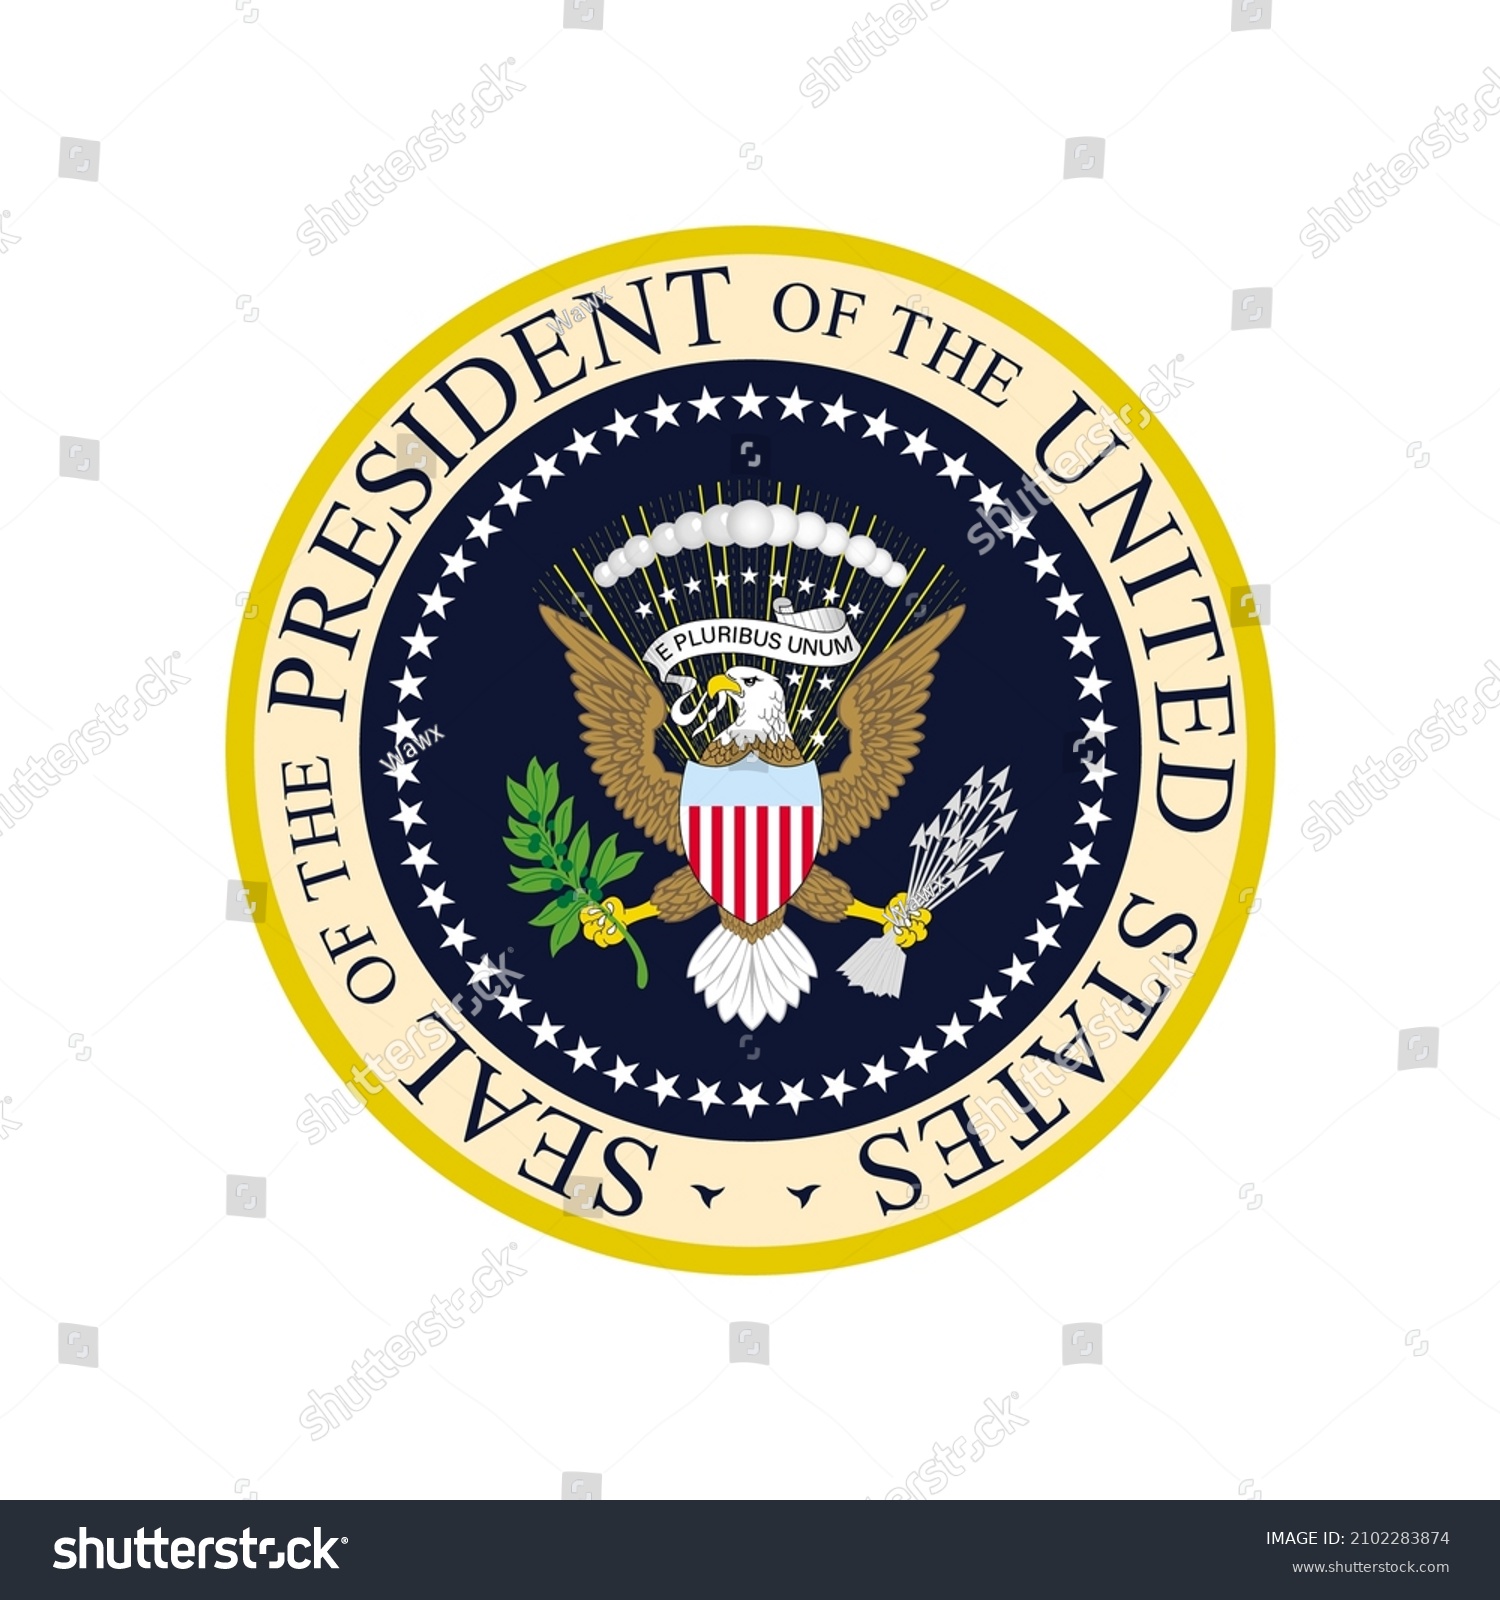 Seal of the president of the United States sticker vinyl decal 